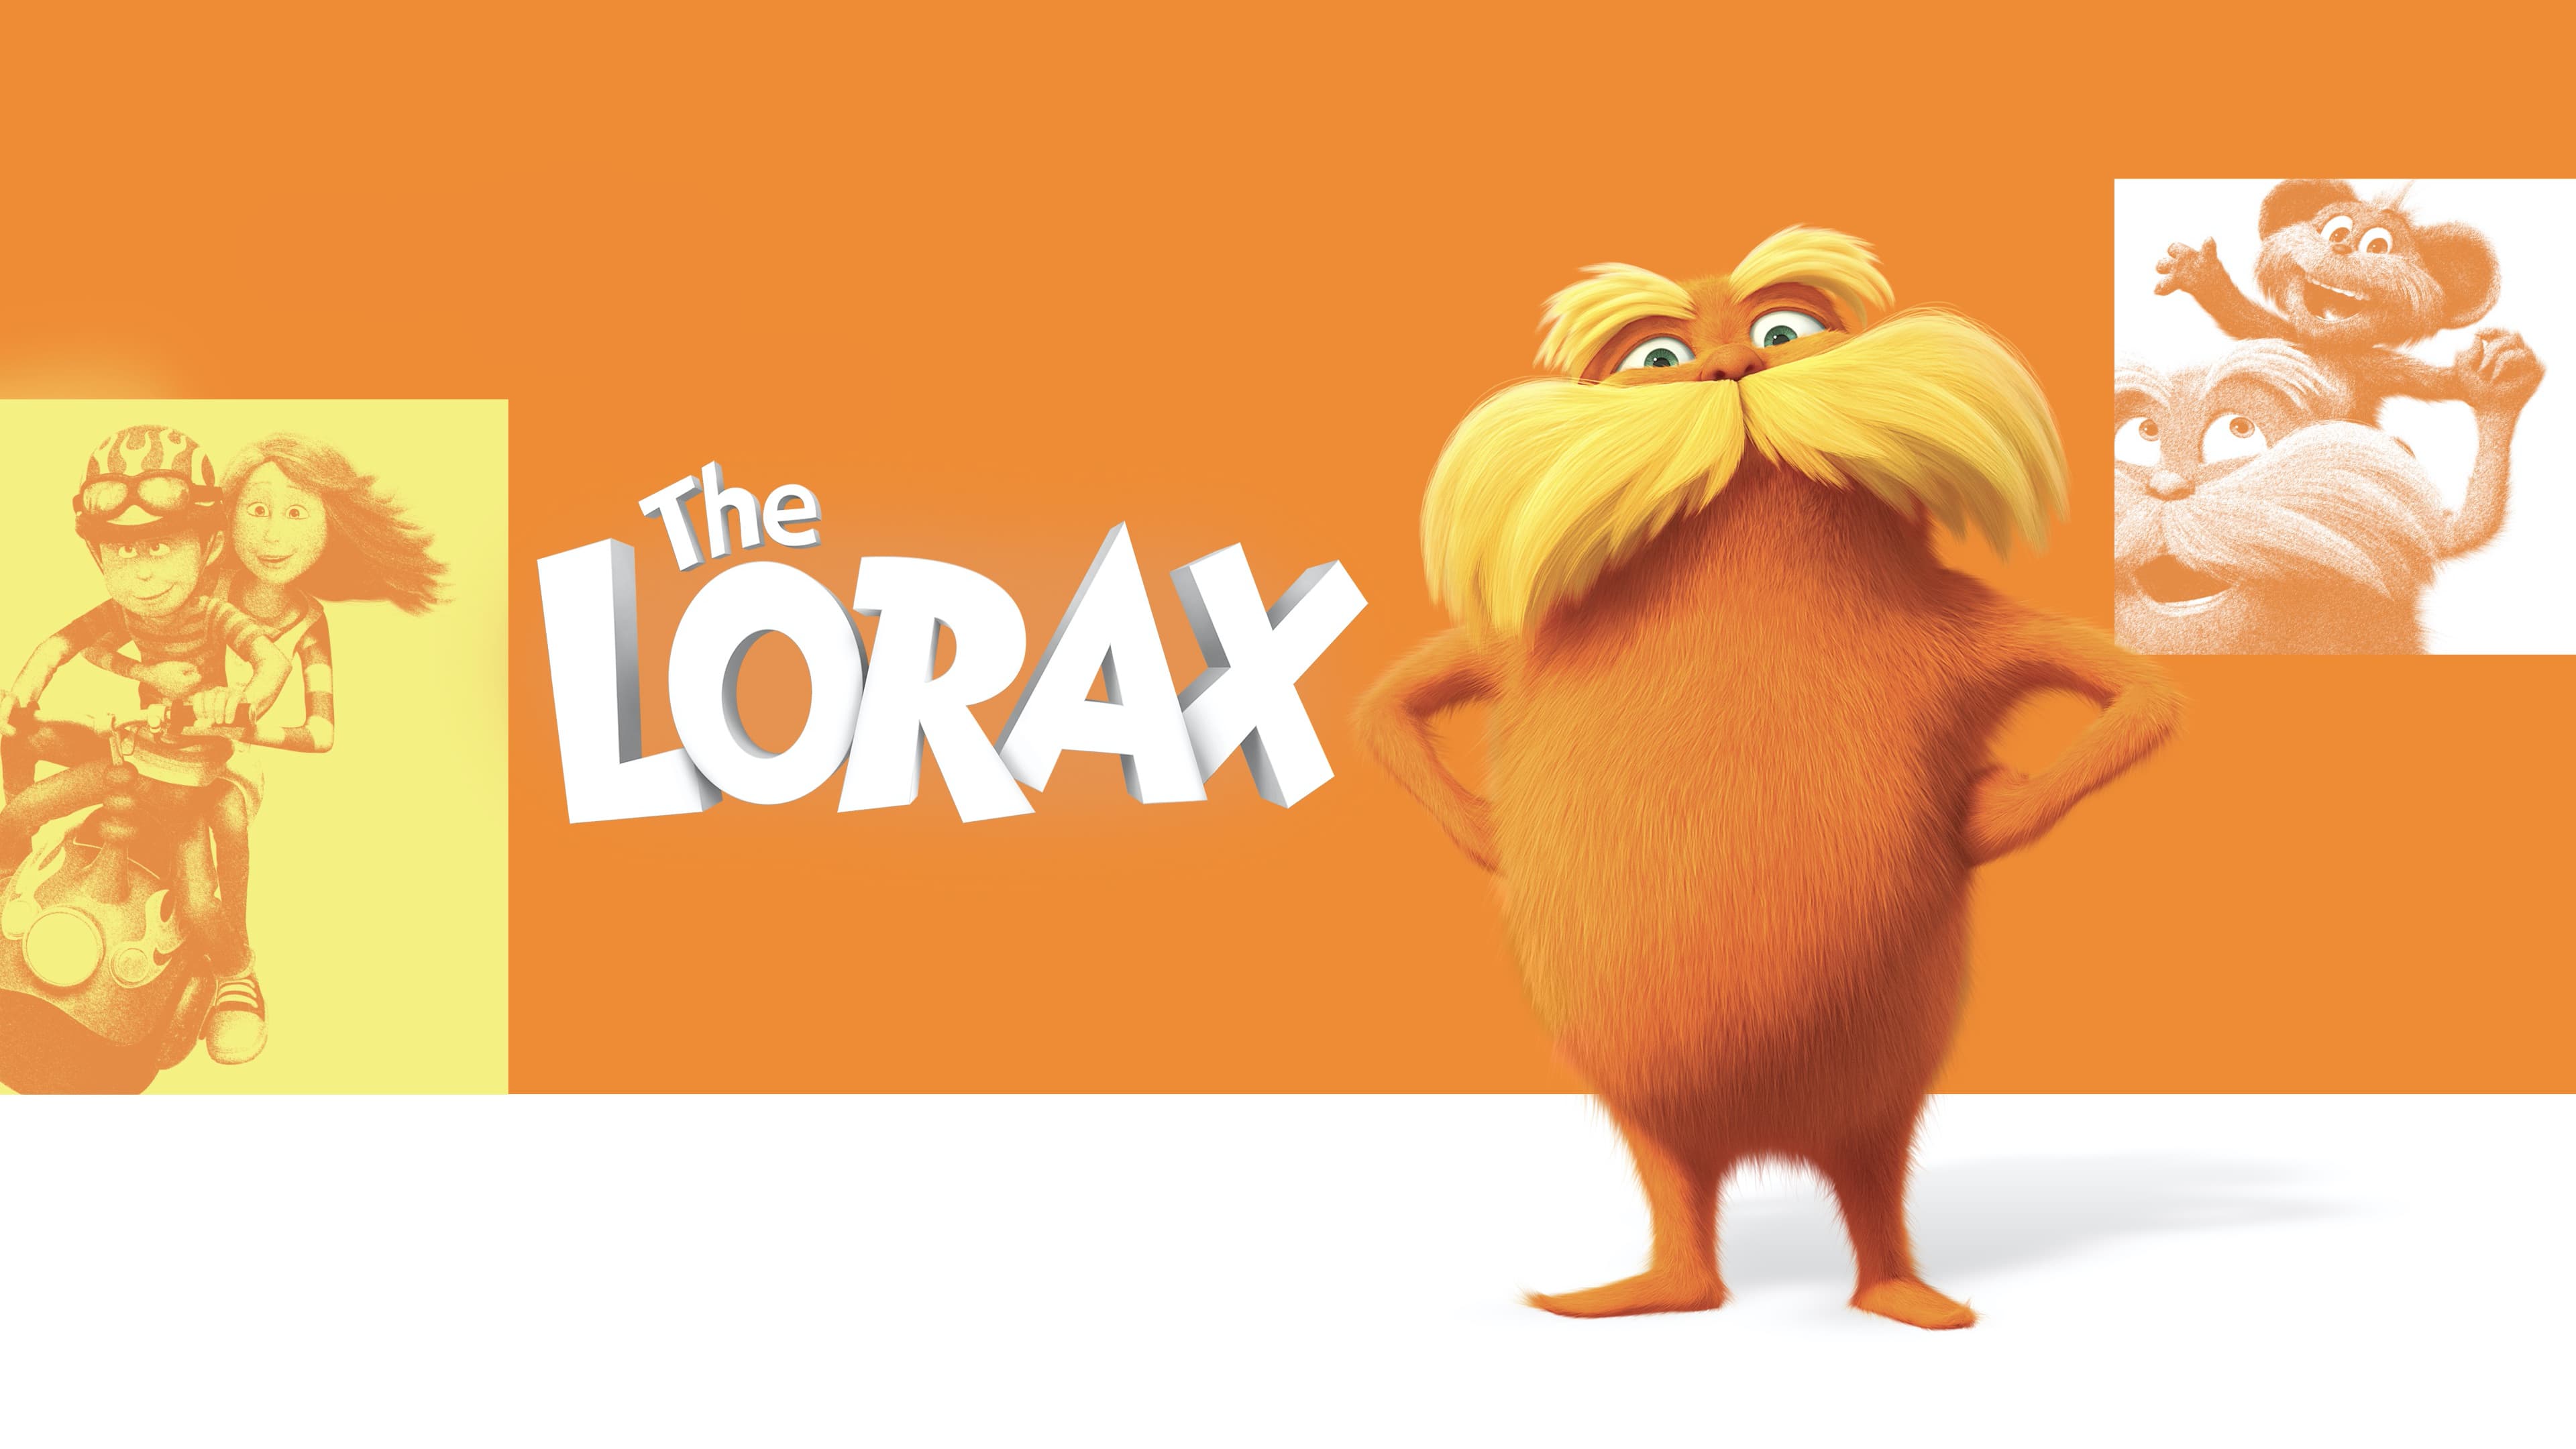 Review of The Lorax.